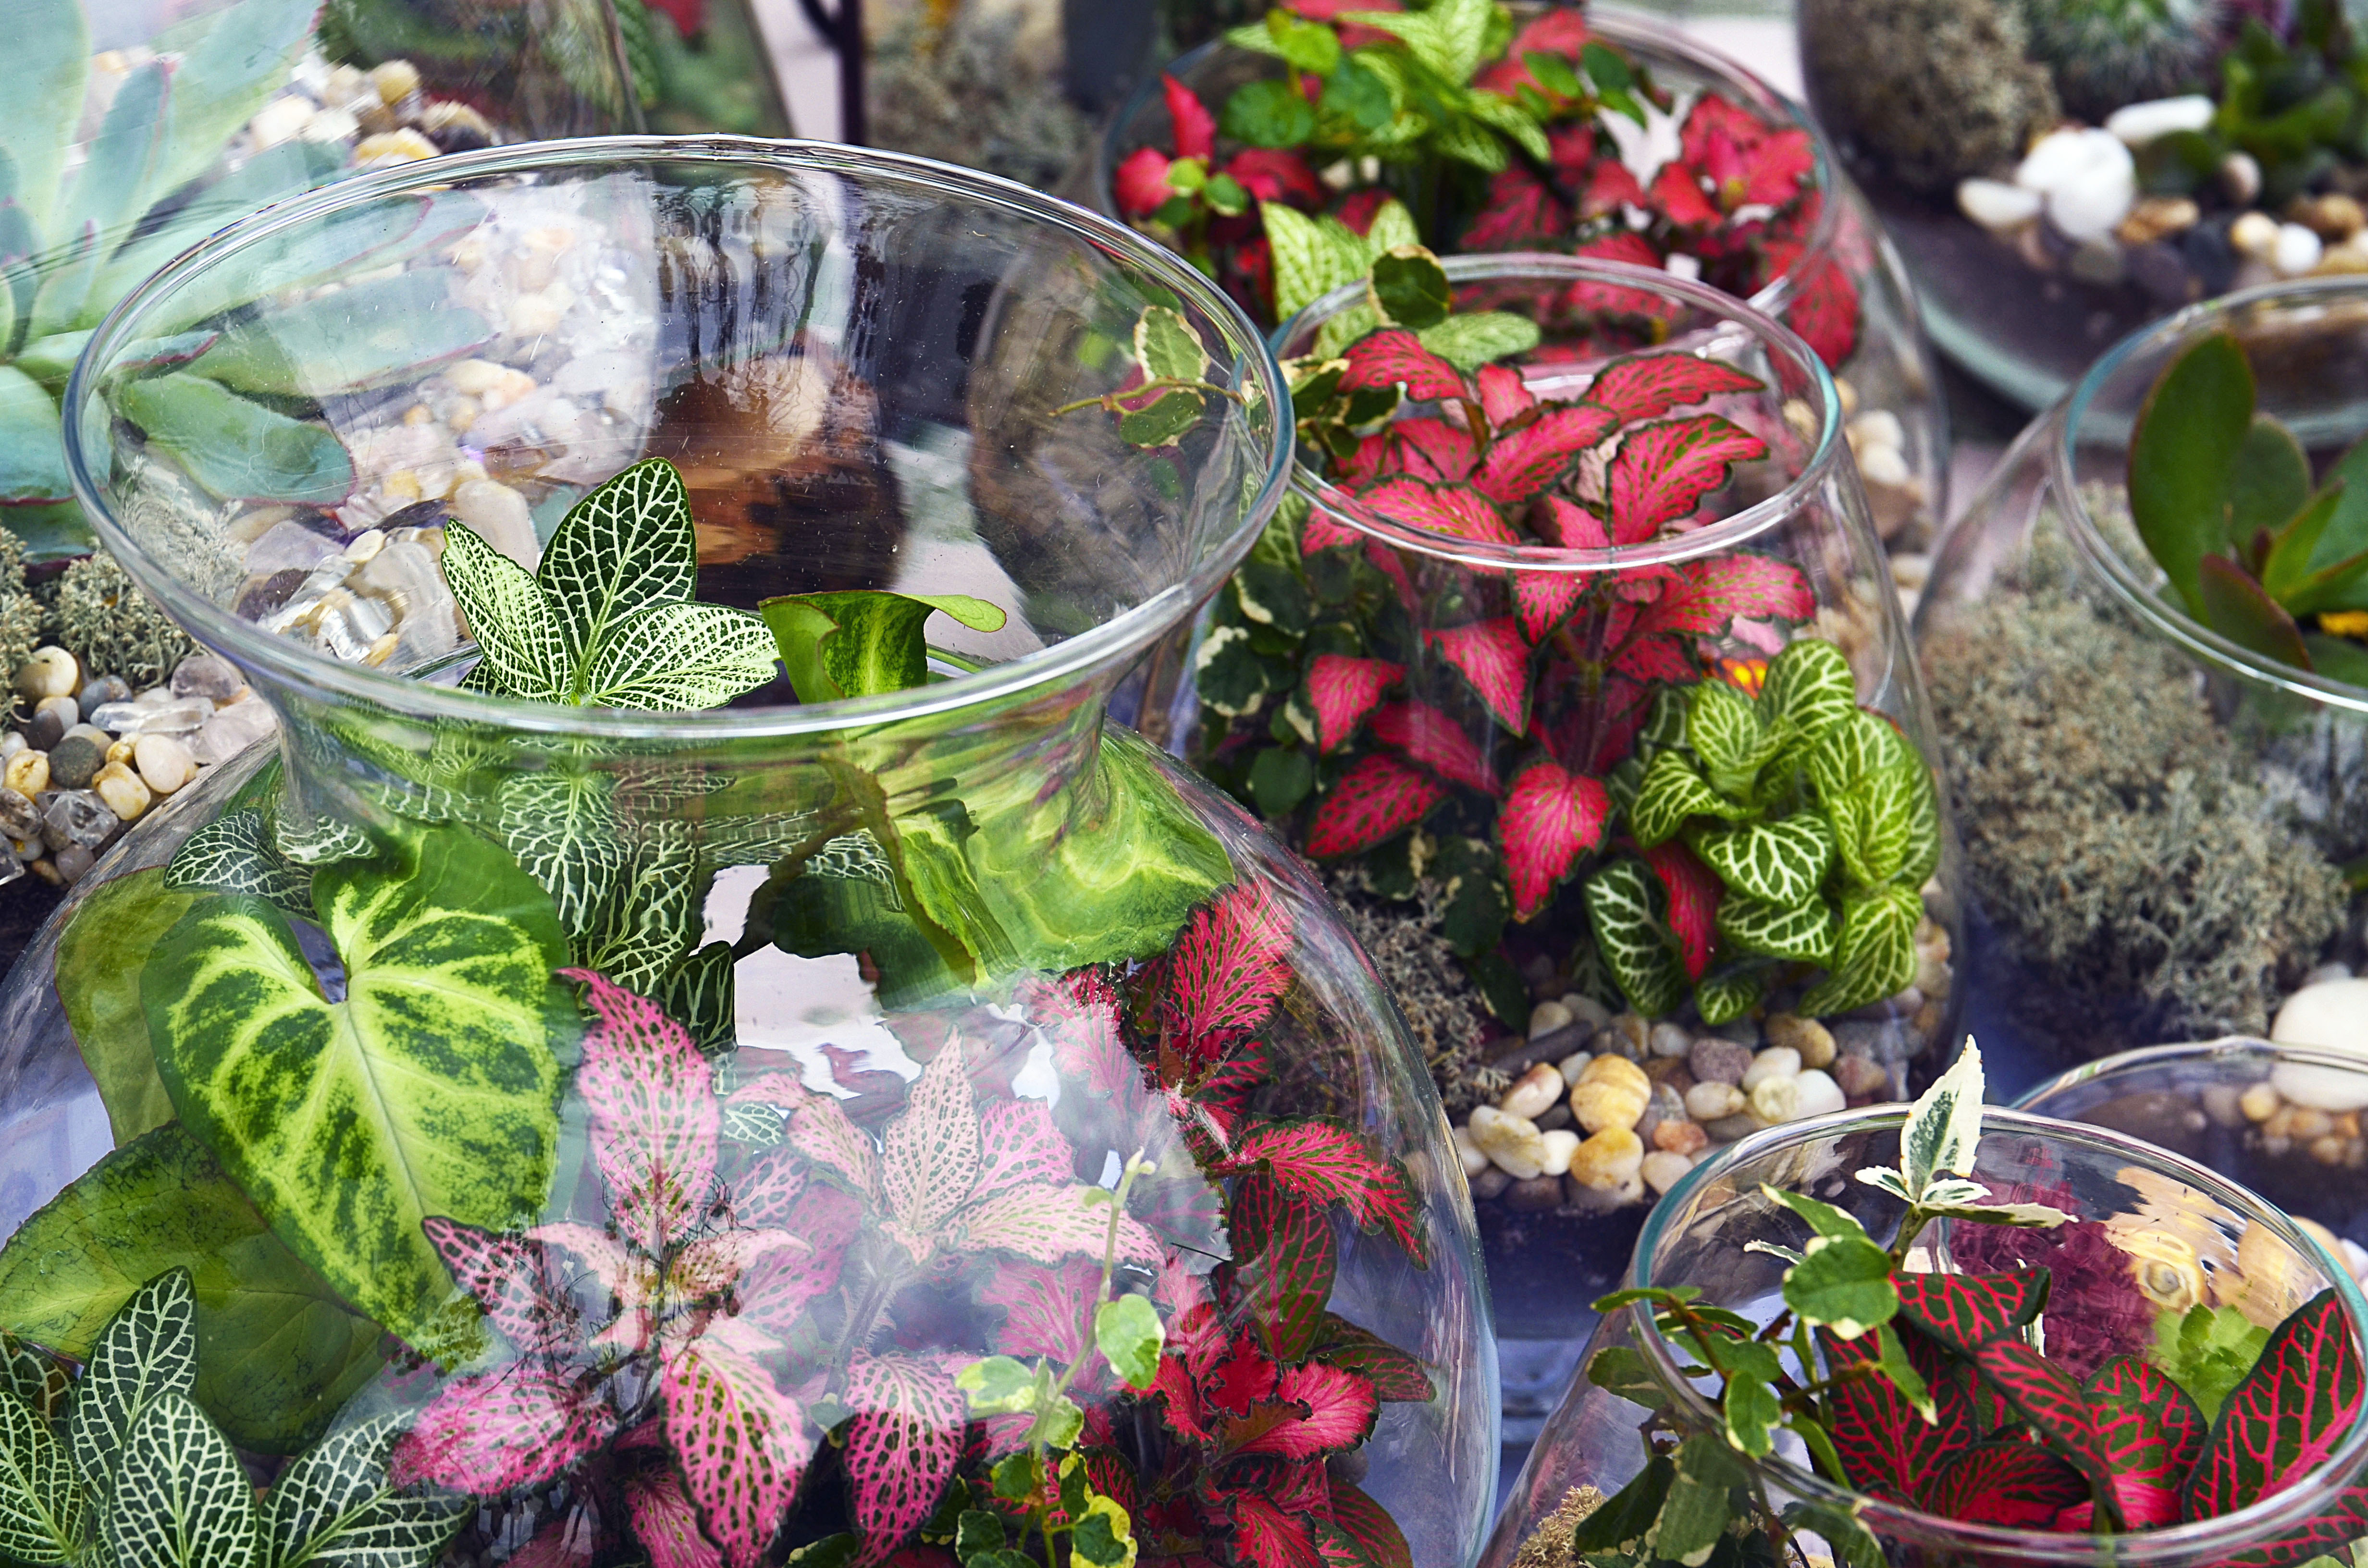 How to Make a Terrarium: The Best Plants for Terrariums | The Old